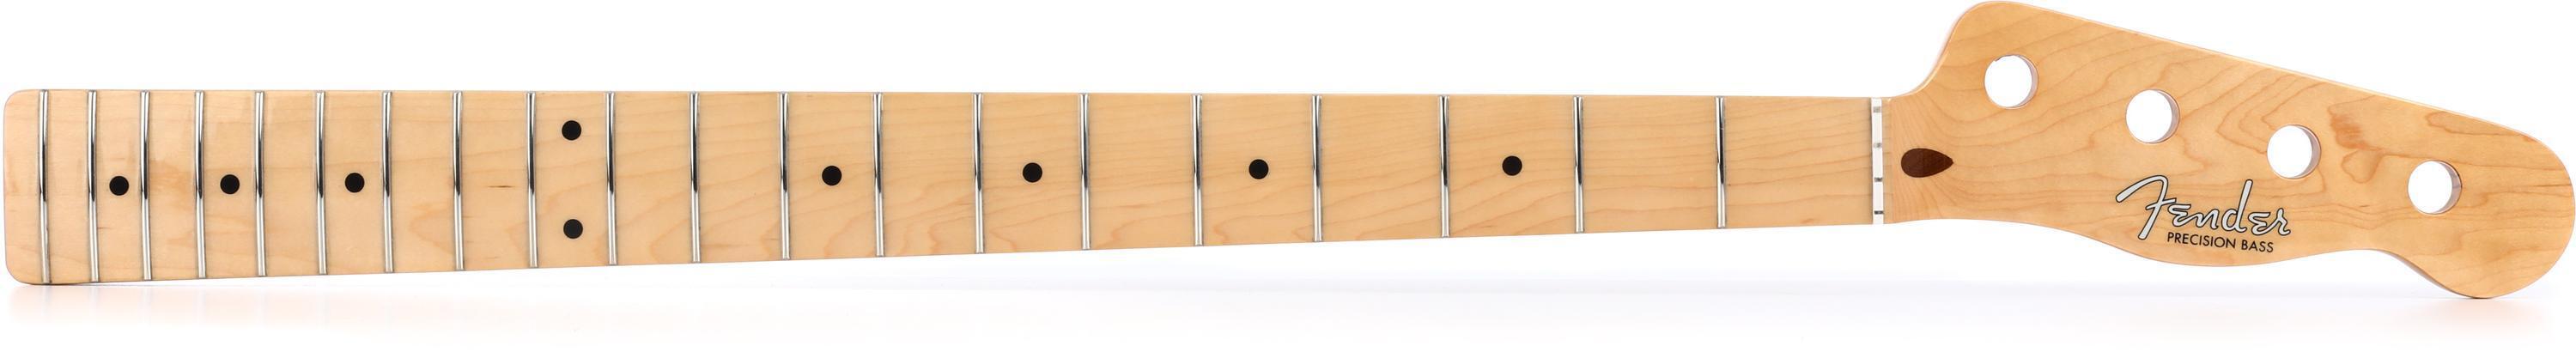 Fender '51 Precision Bass Neck - Maple Fingerboard | Sweetwater